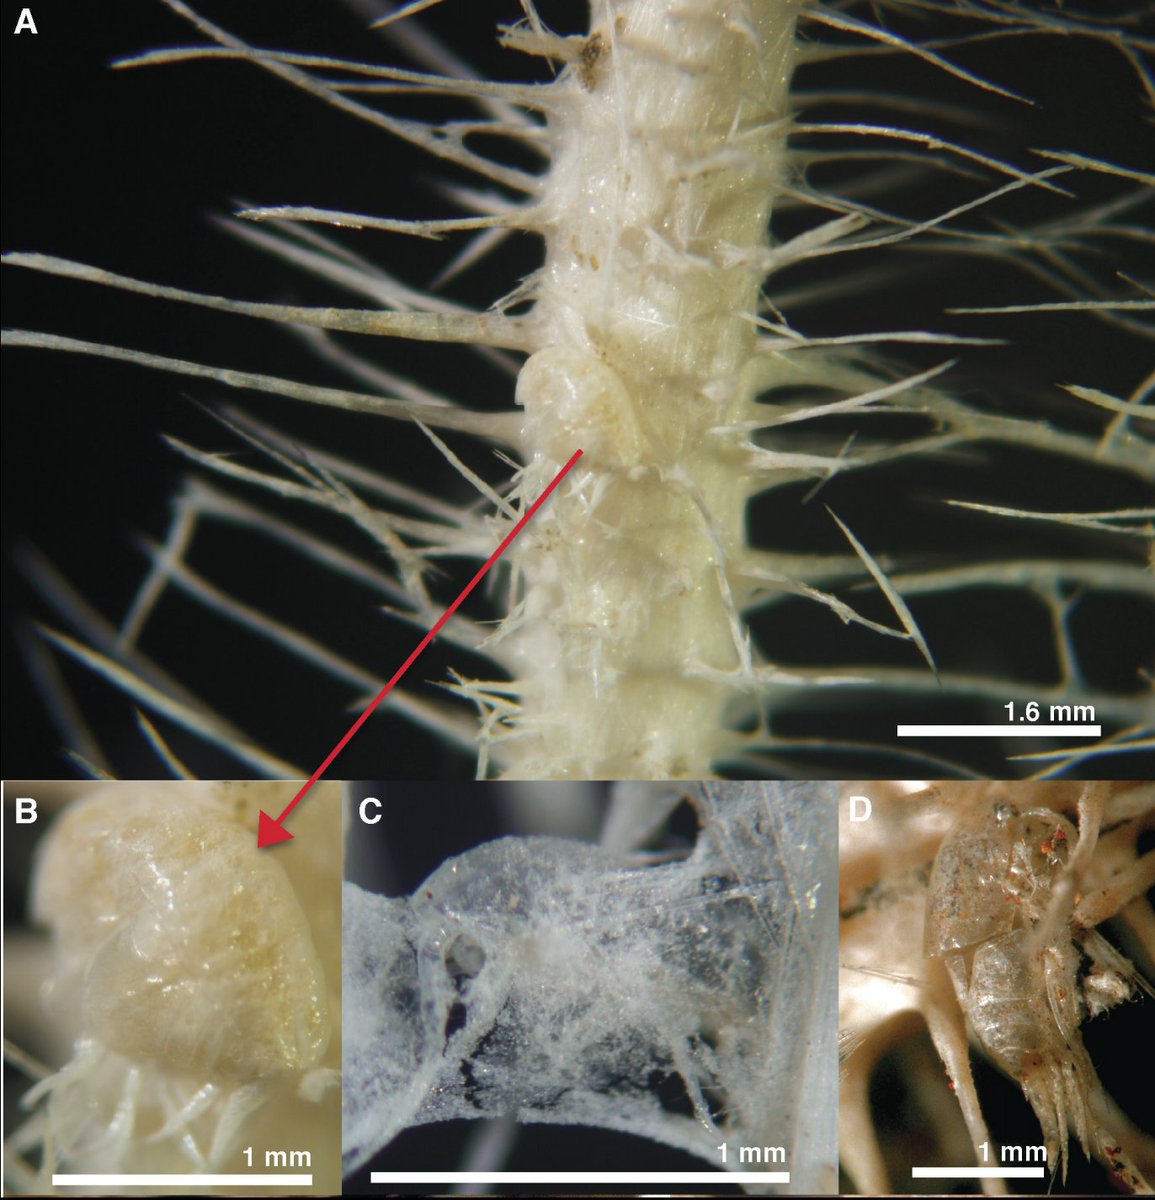 These small shrimp-like animals are victims of a carnivorous sponge. They're first trapped in spines and then slowly digested by the sponge's own 'skin' until all that remains is a skeleton encased within the sponge's cells. Study:  https://bit.ly/2KSQY93 